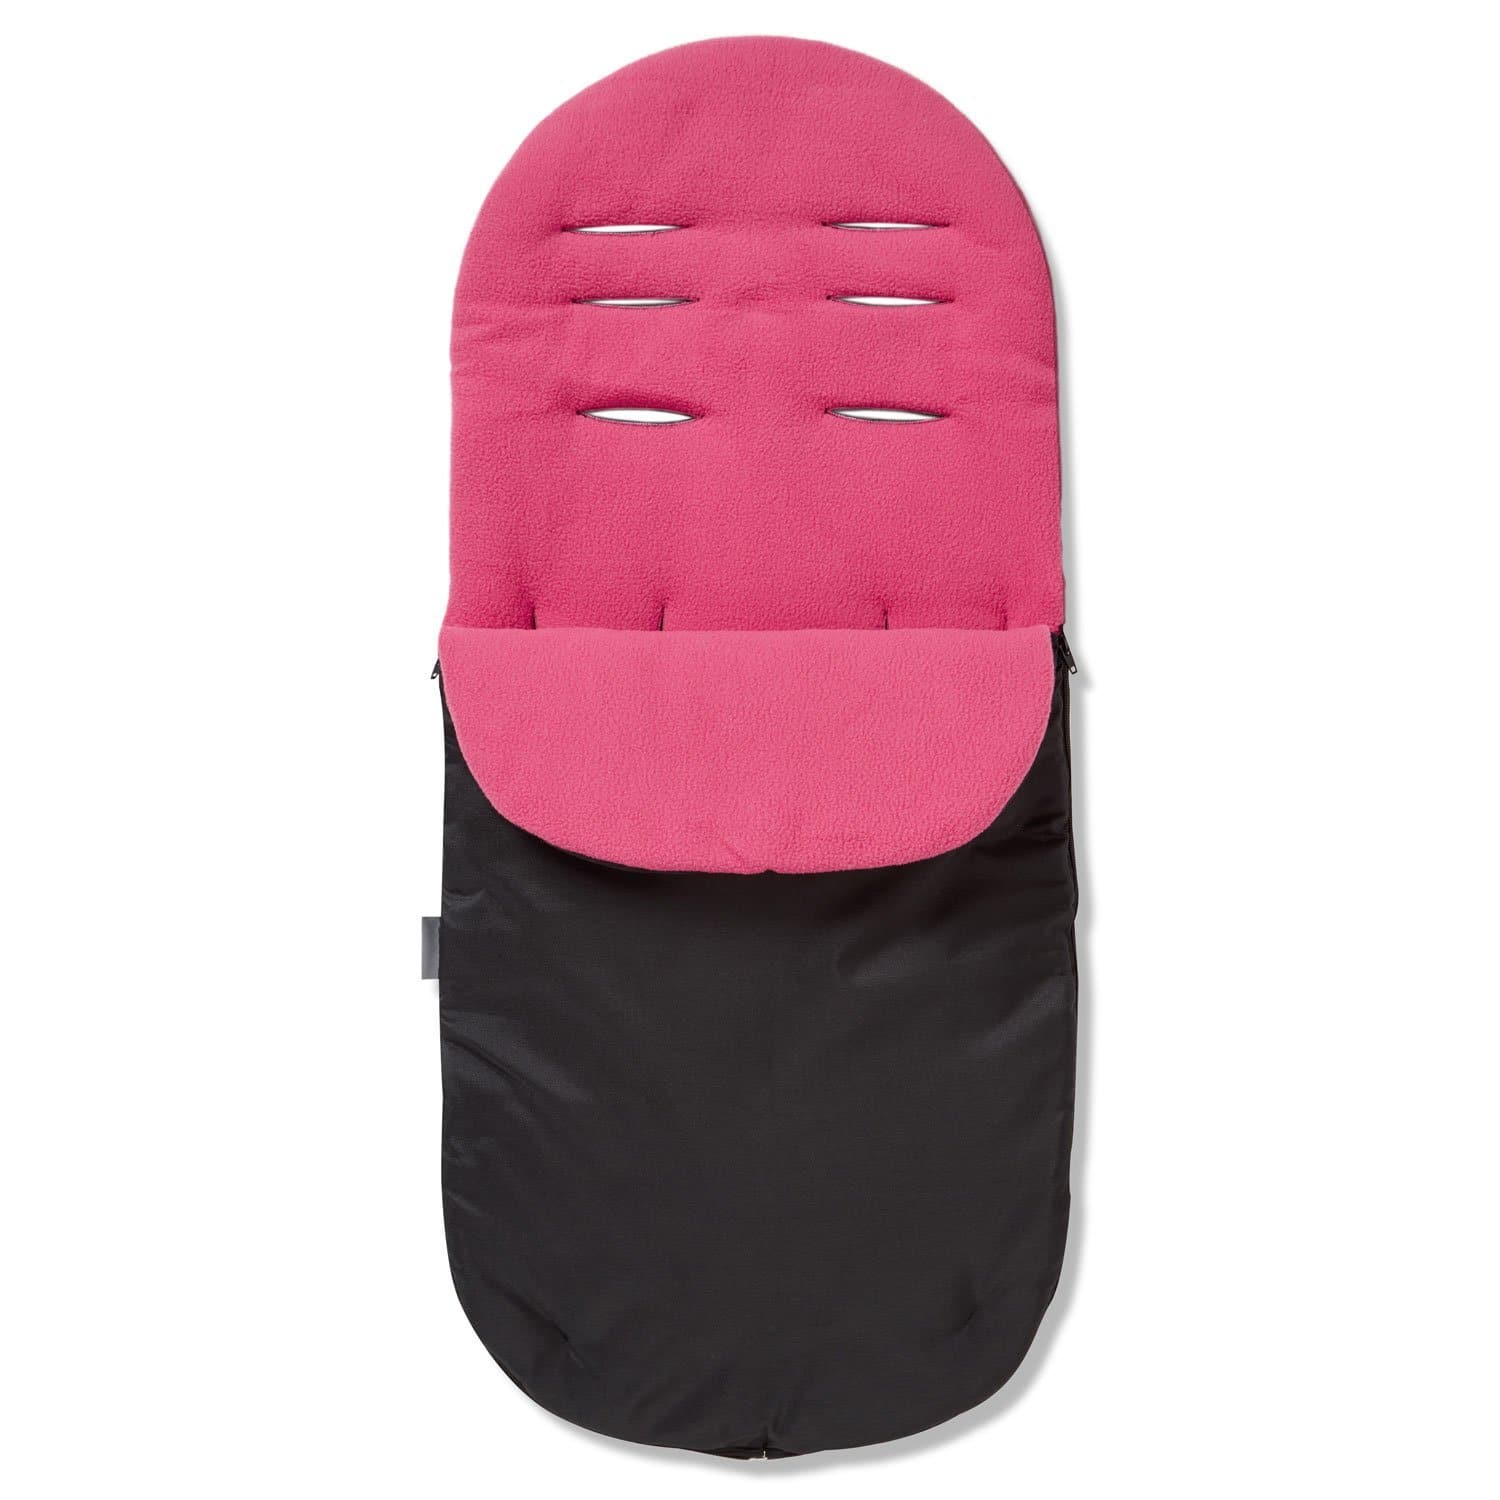 Footmuff / Cosy Toes Compatible with Casual - Dark Pink / Fits All Models | For Your Little One